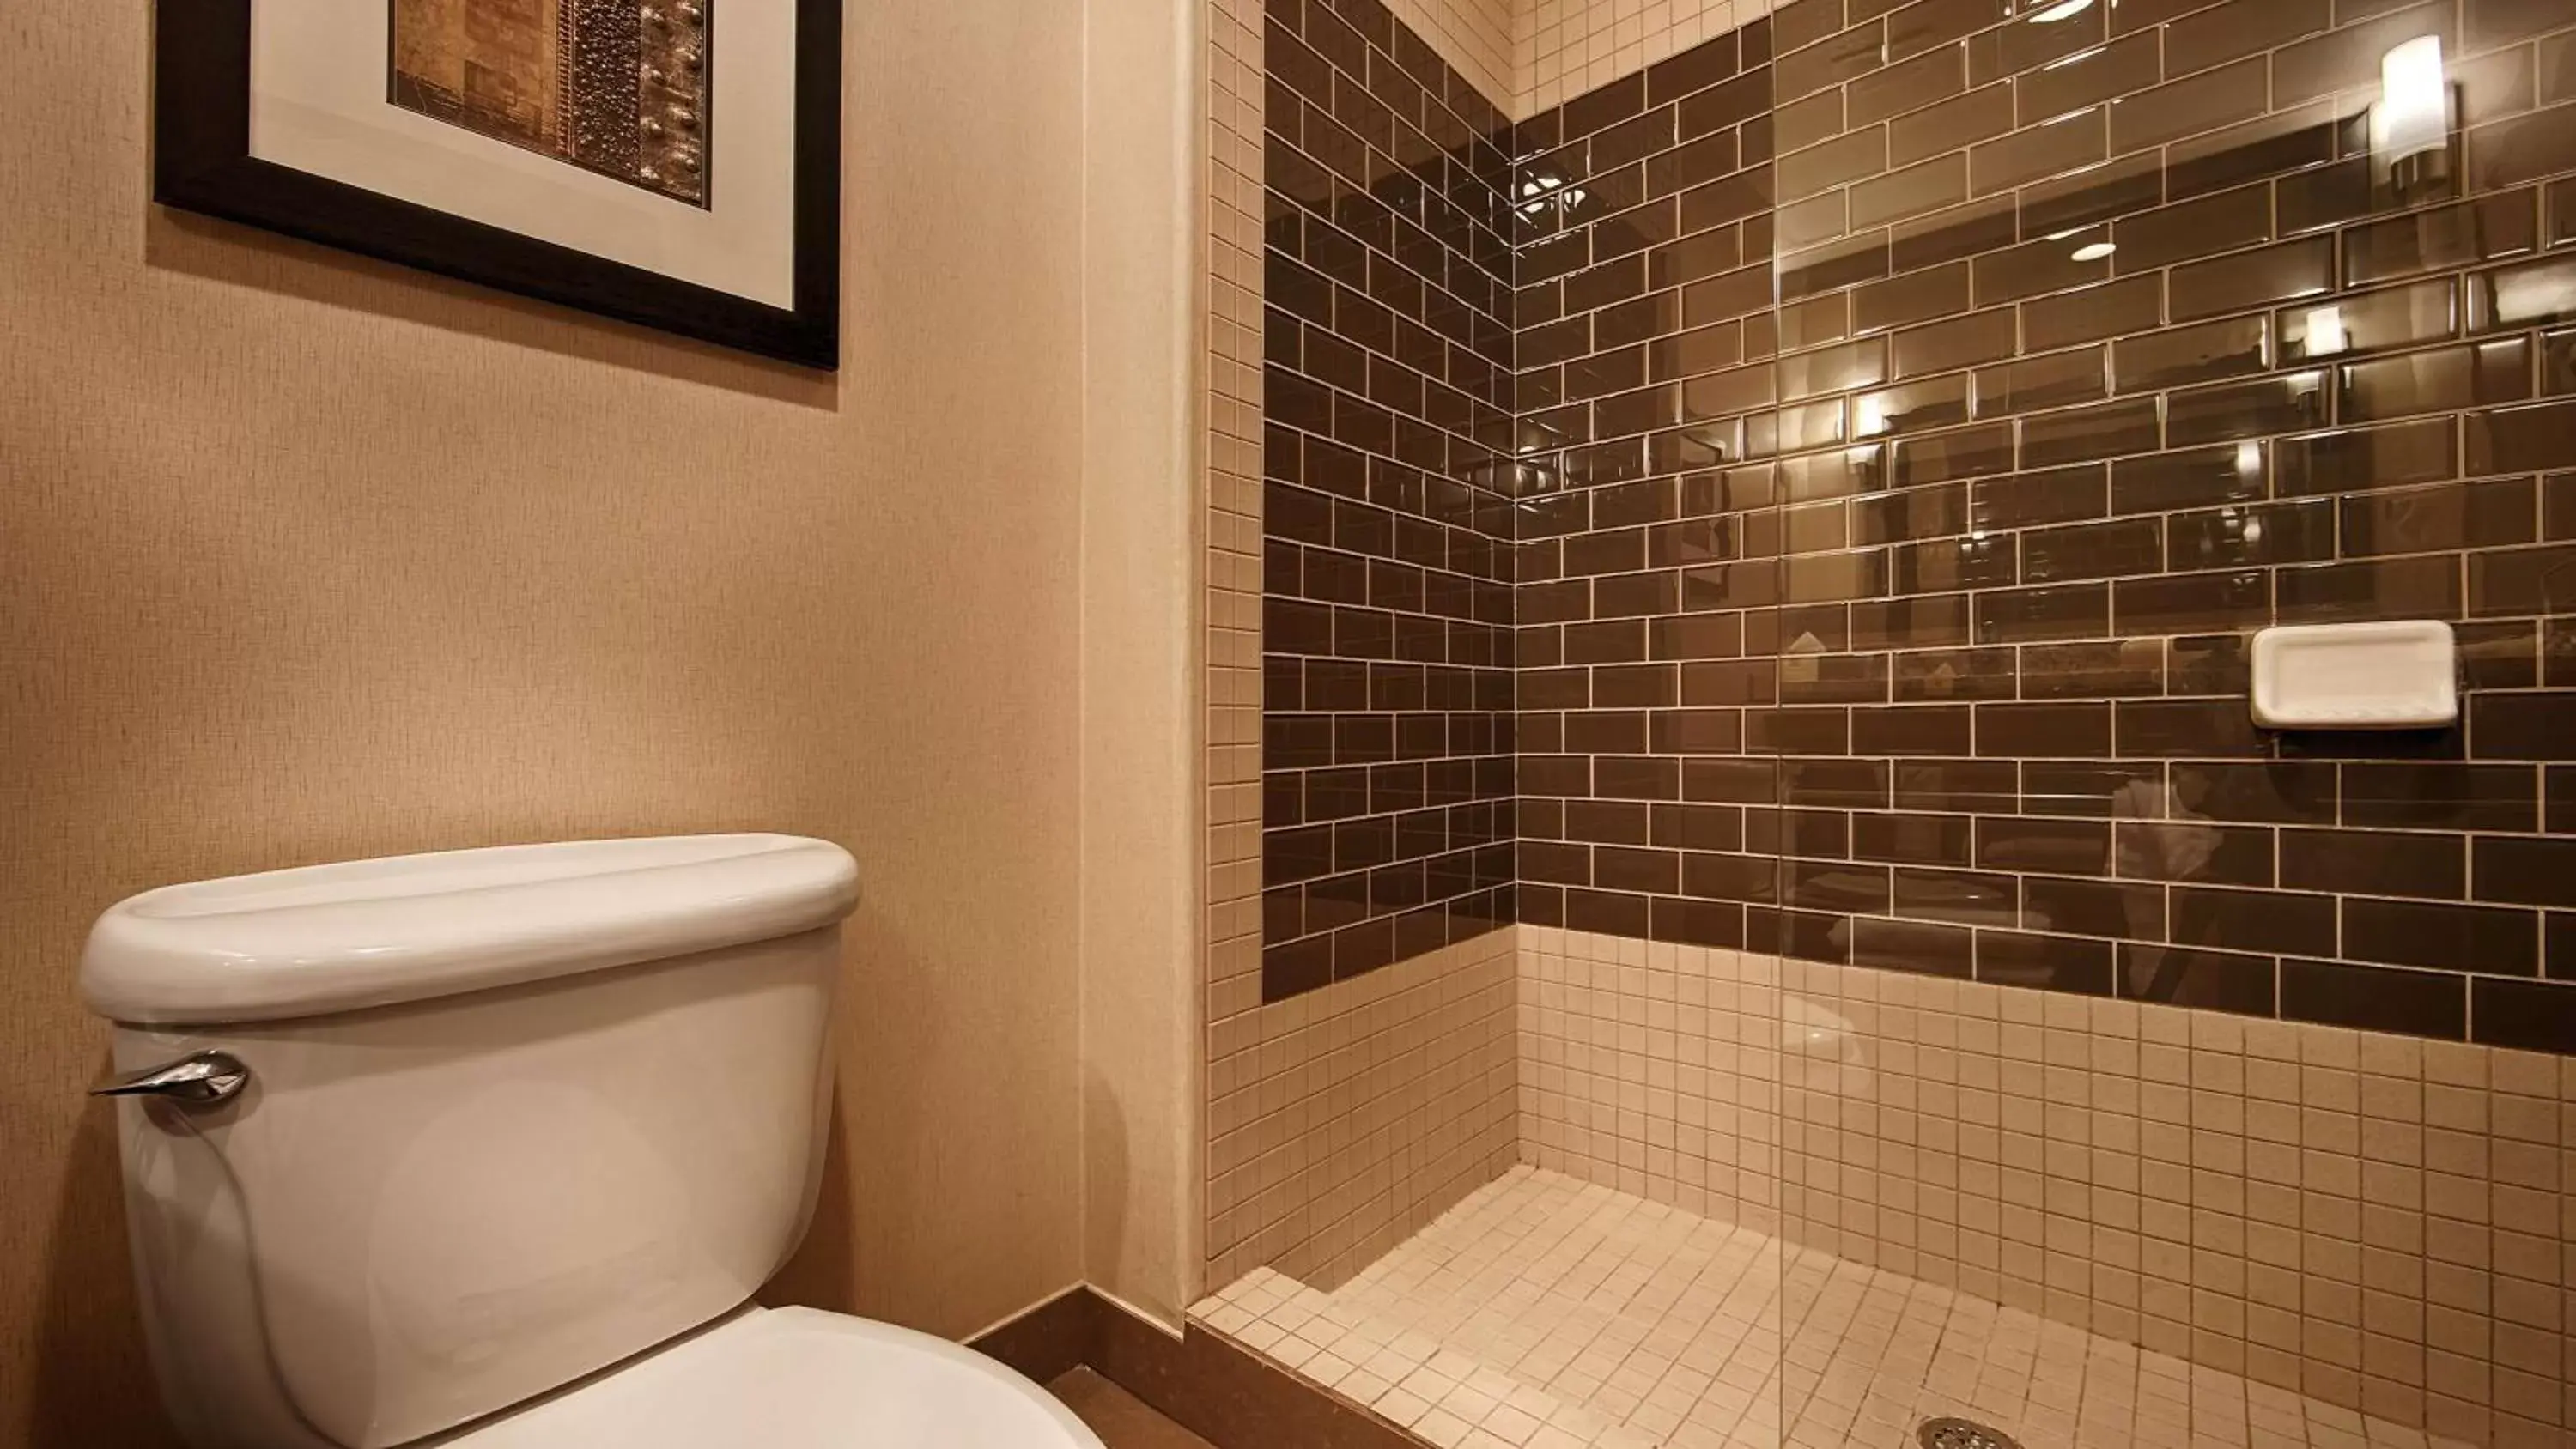 Bathroom in Best Western Plus Lackland Hotel and Suites.